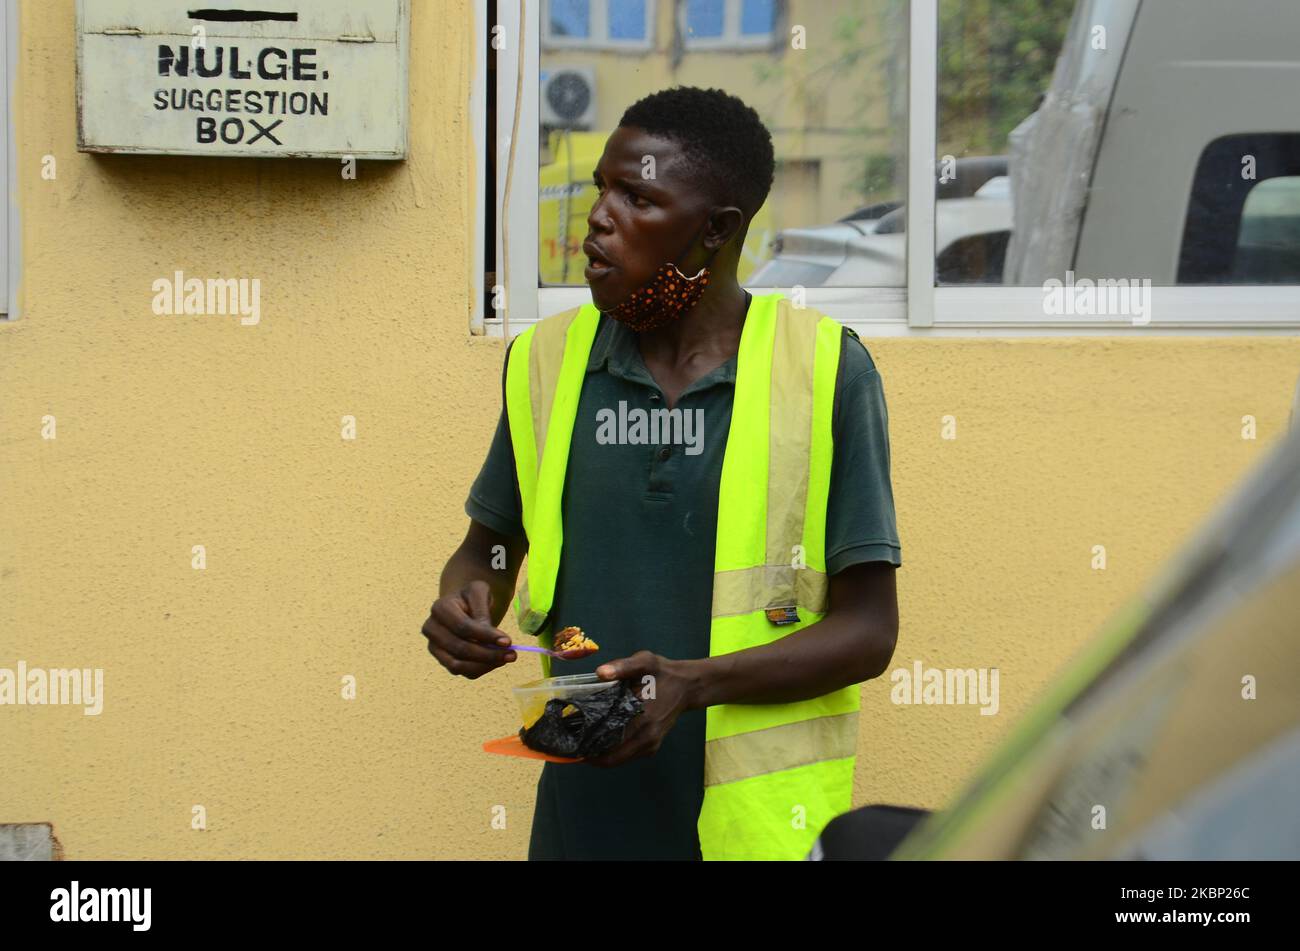 A coronavirus COVID-19 offender eat after concluding his community service in Lagos, after the Lagos State Special Offences (Mobile) Court sentenced 202 persons to community service and a fine of N5,000 each for violating the stay-at-home meant to contain the spread of the Covid-19 pandemic on Tuesday 19, May 2020. (Photo by Olukayode Jaiyeola/NurPhoto) Stock Photo